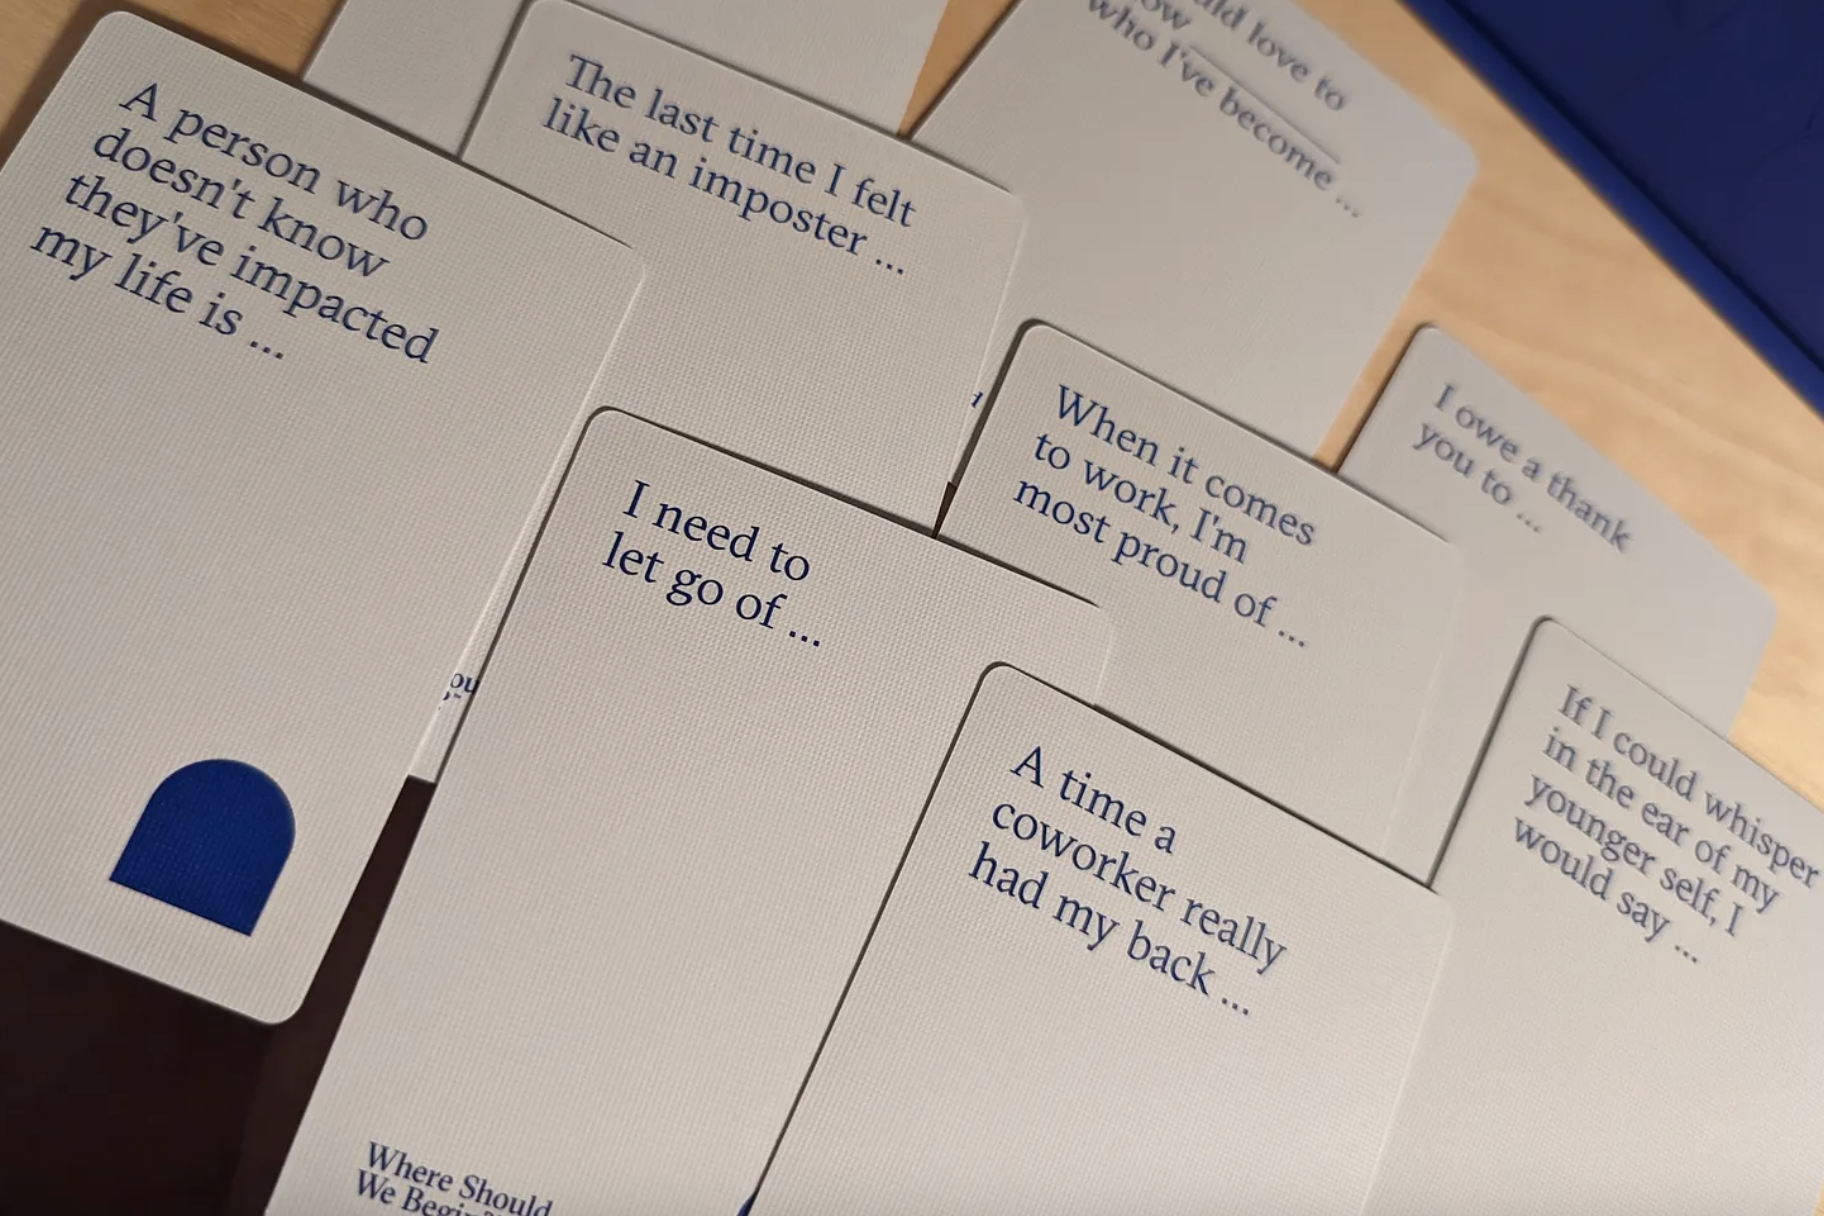 Cards from Esther Perels's "Where Should We Begin: A Game of Stories" card game laid on a table.